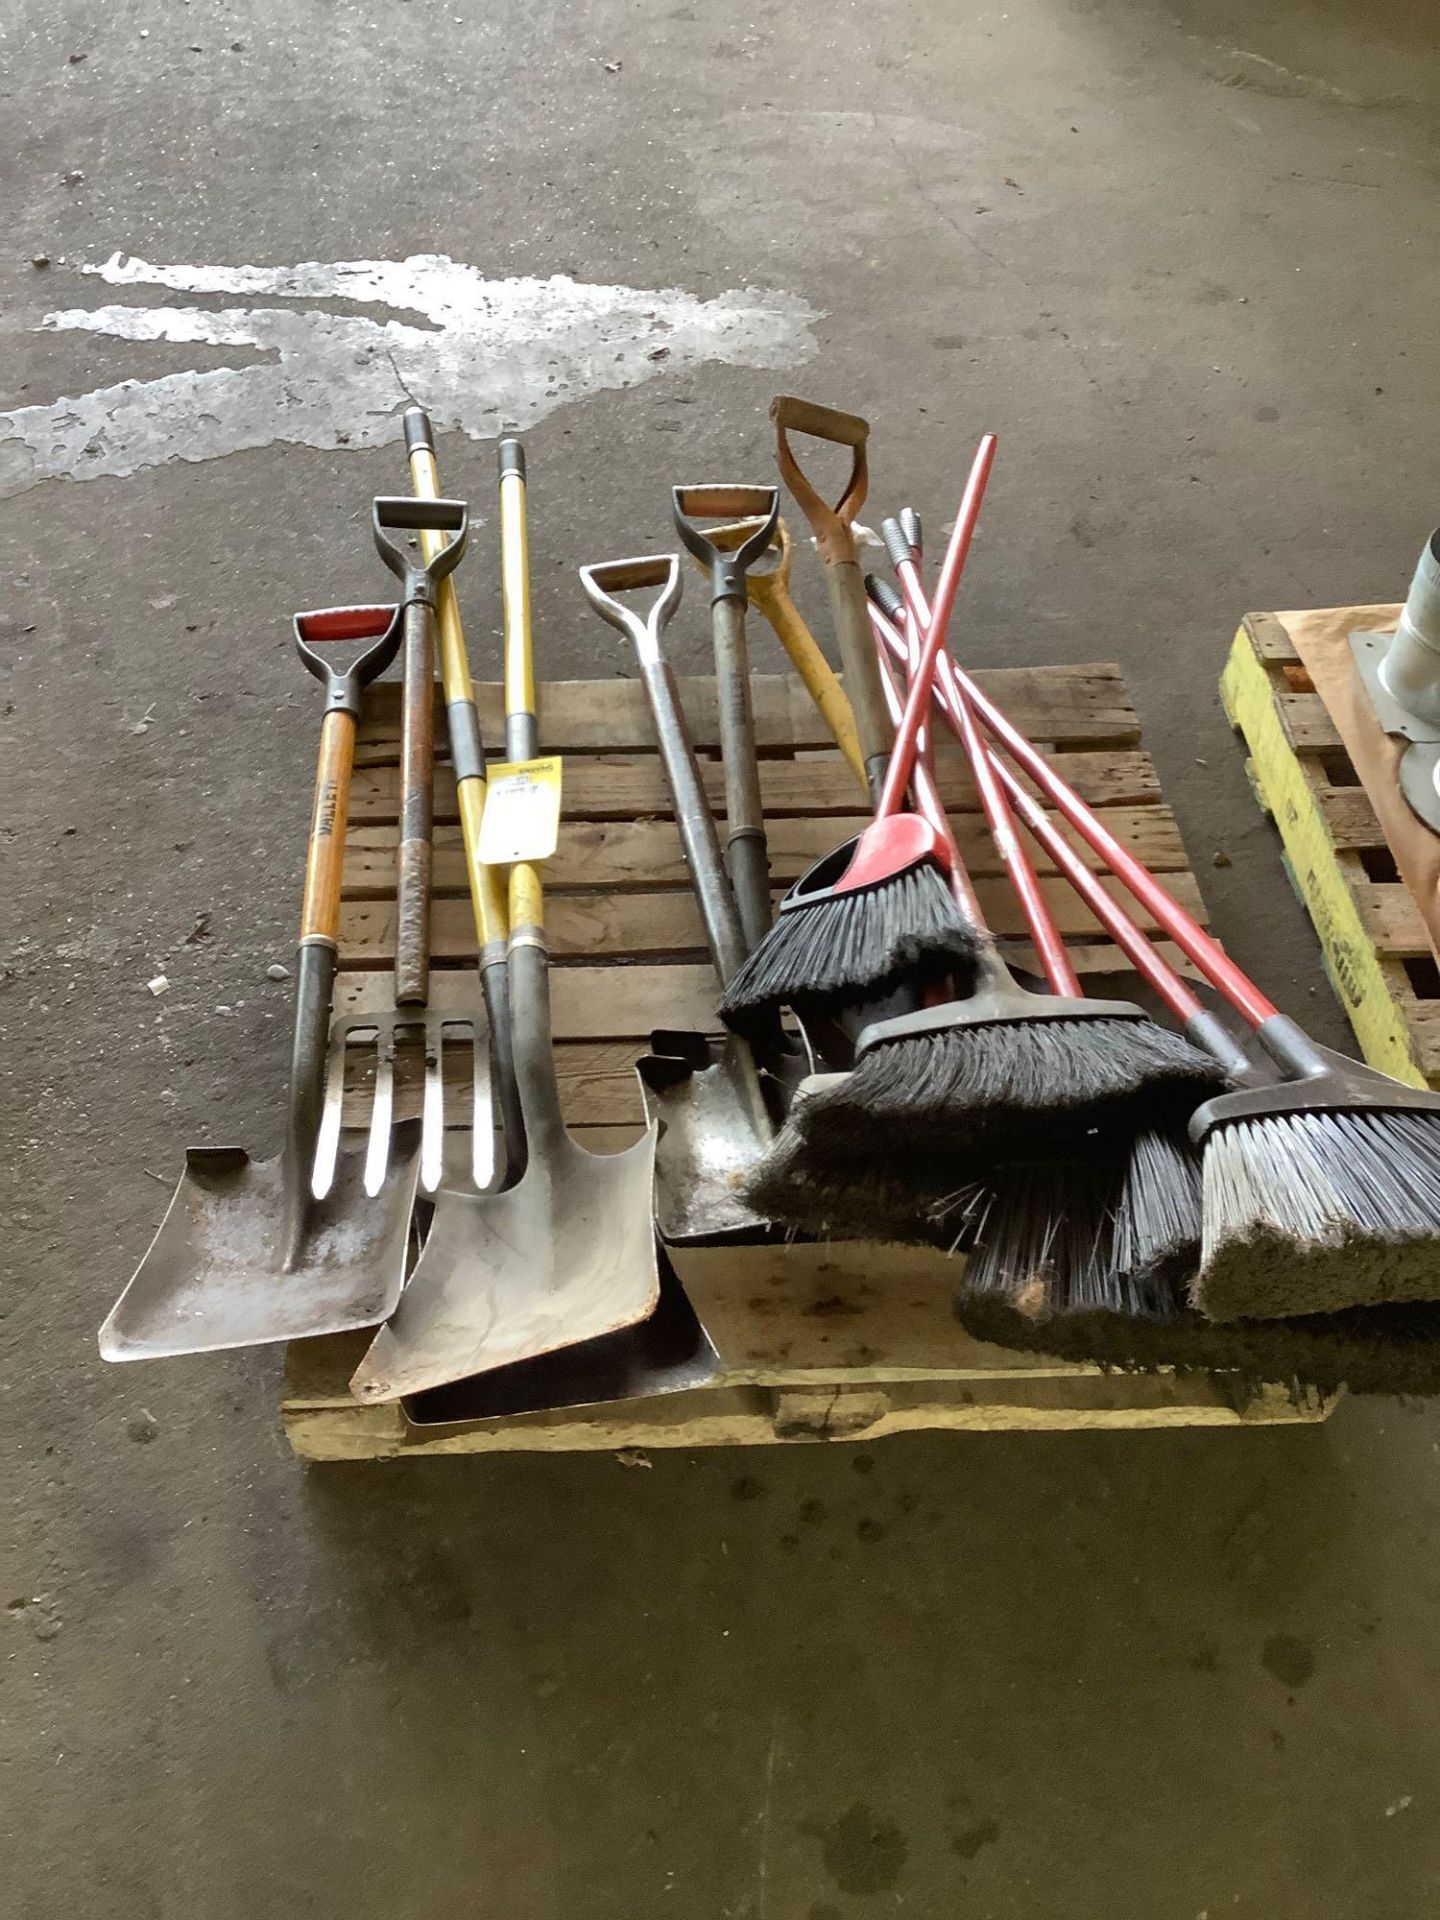 Lot of Shop Shovels and Brooms - Image 2 of 2